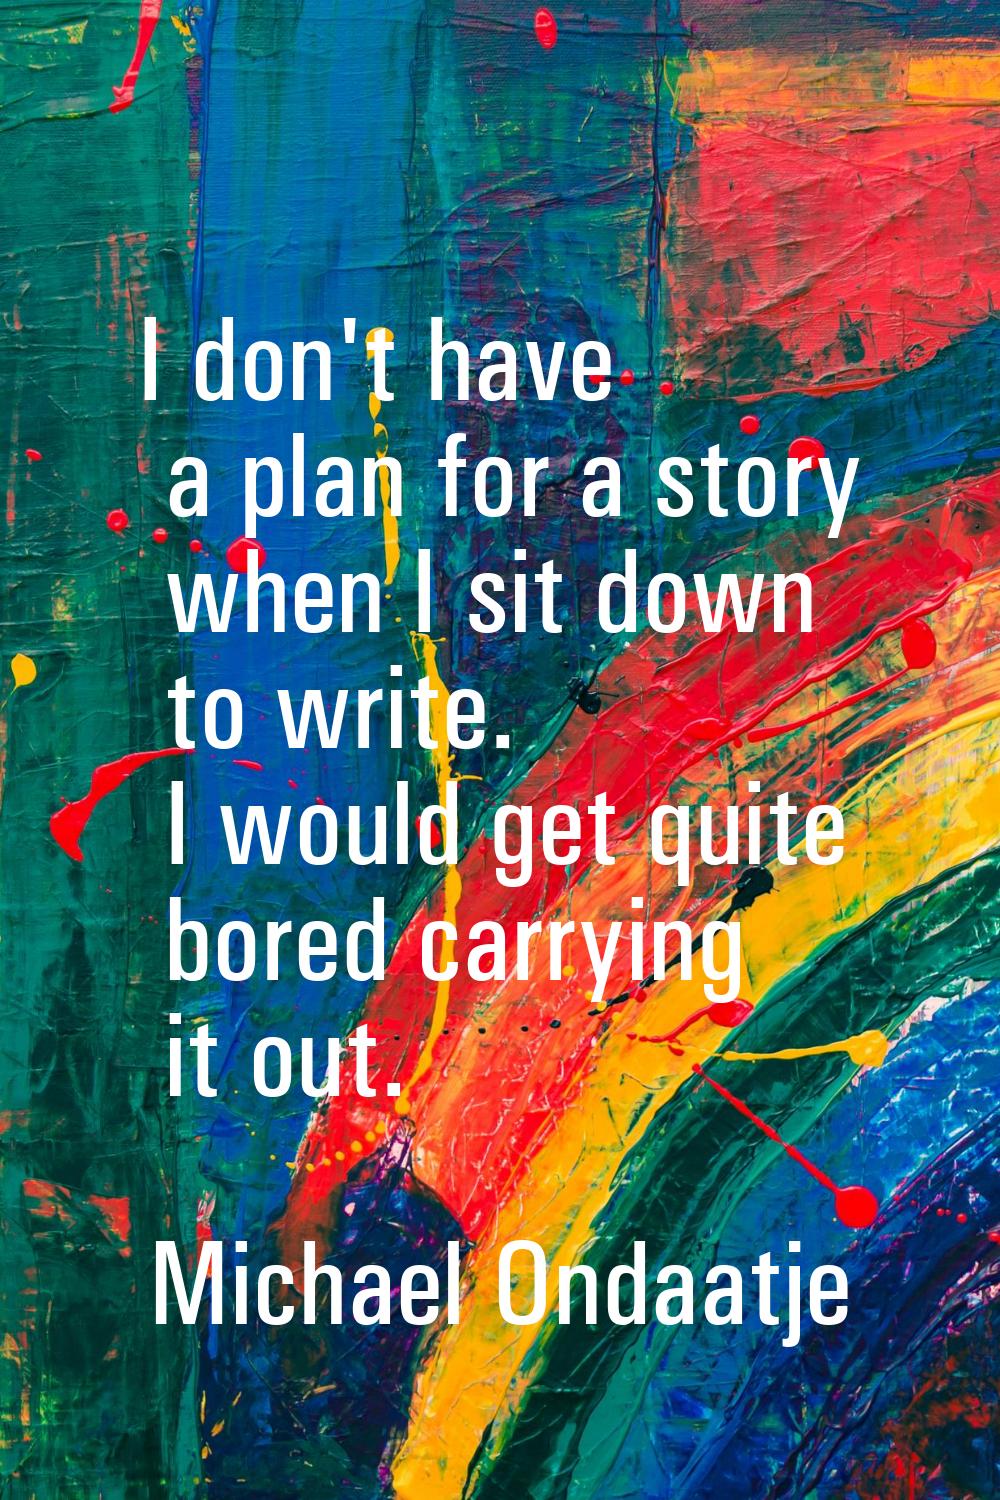 I don't have a plan for a story when I sit down to write. I would get quite bored carrying it out.